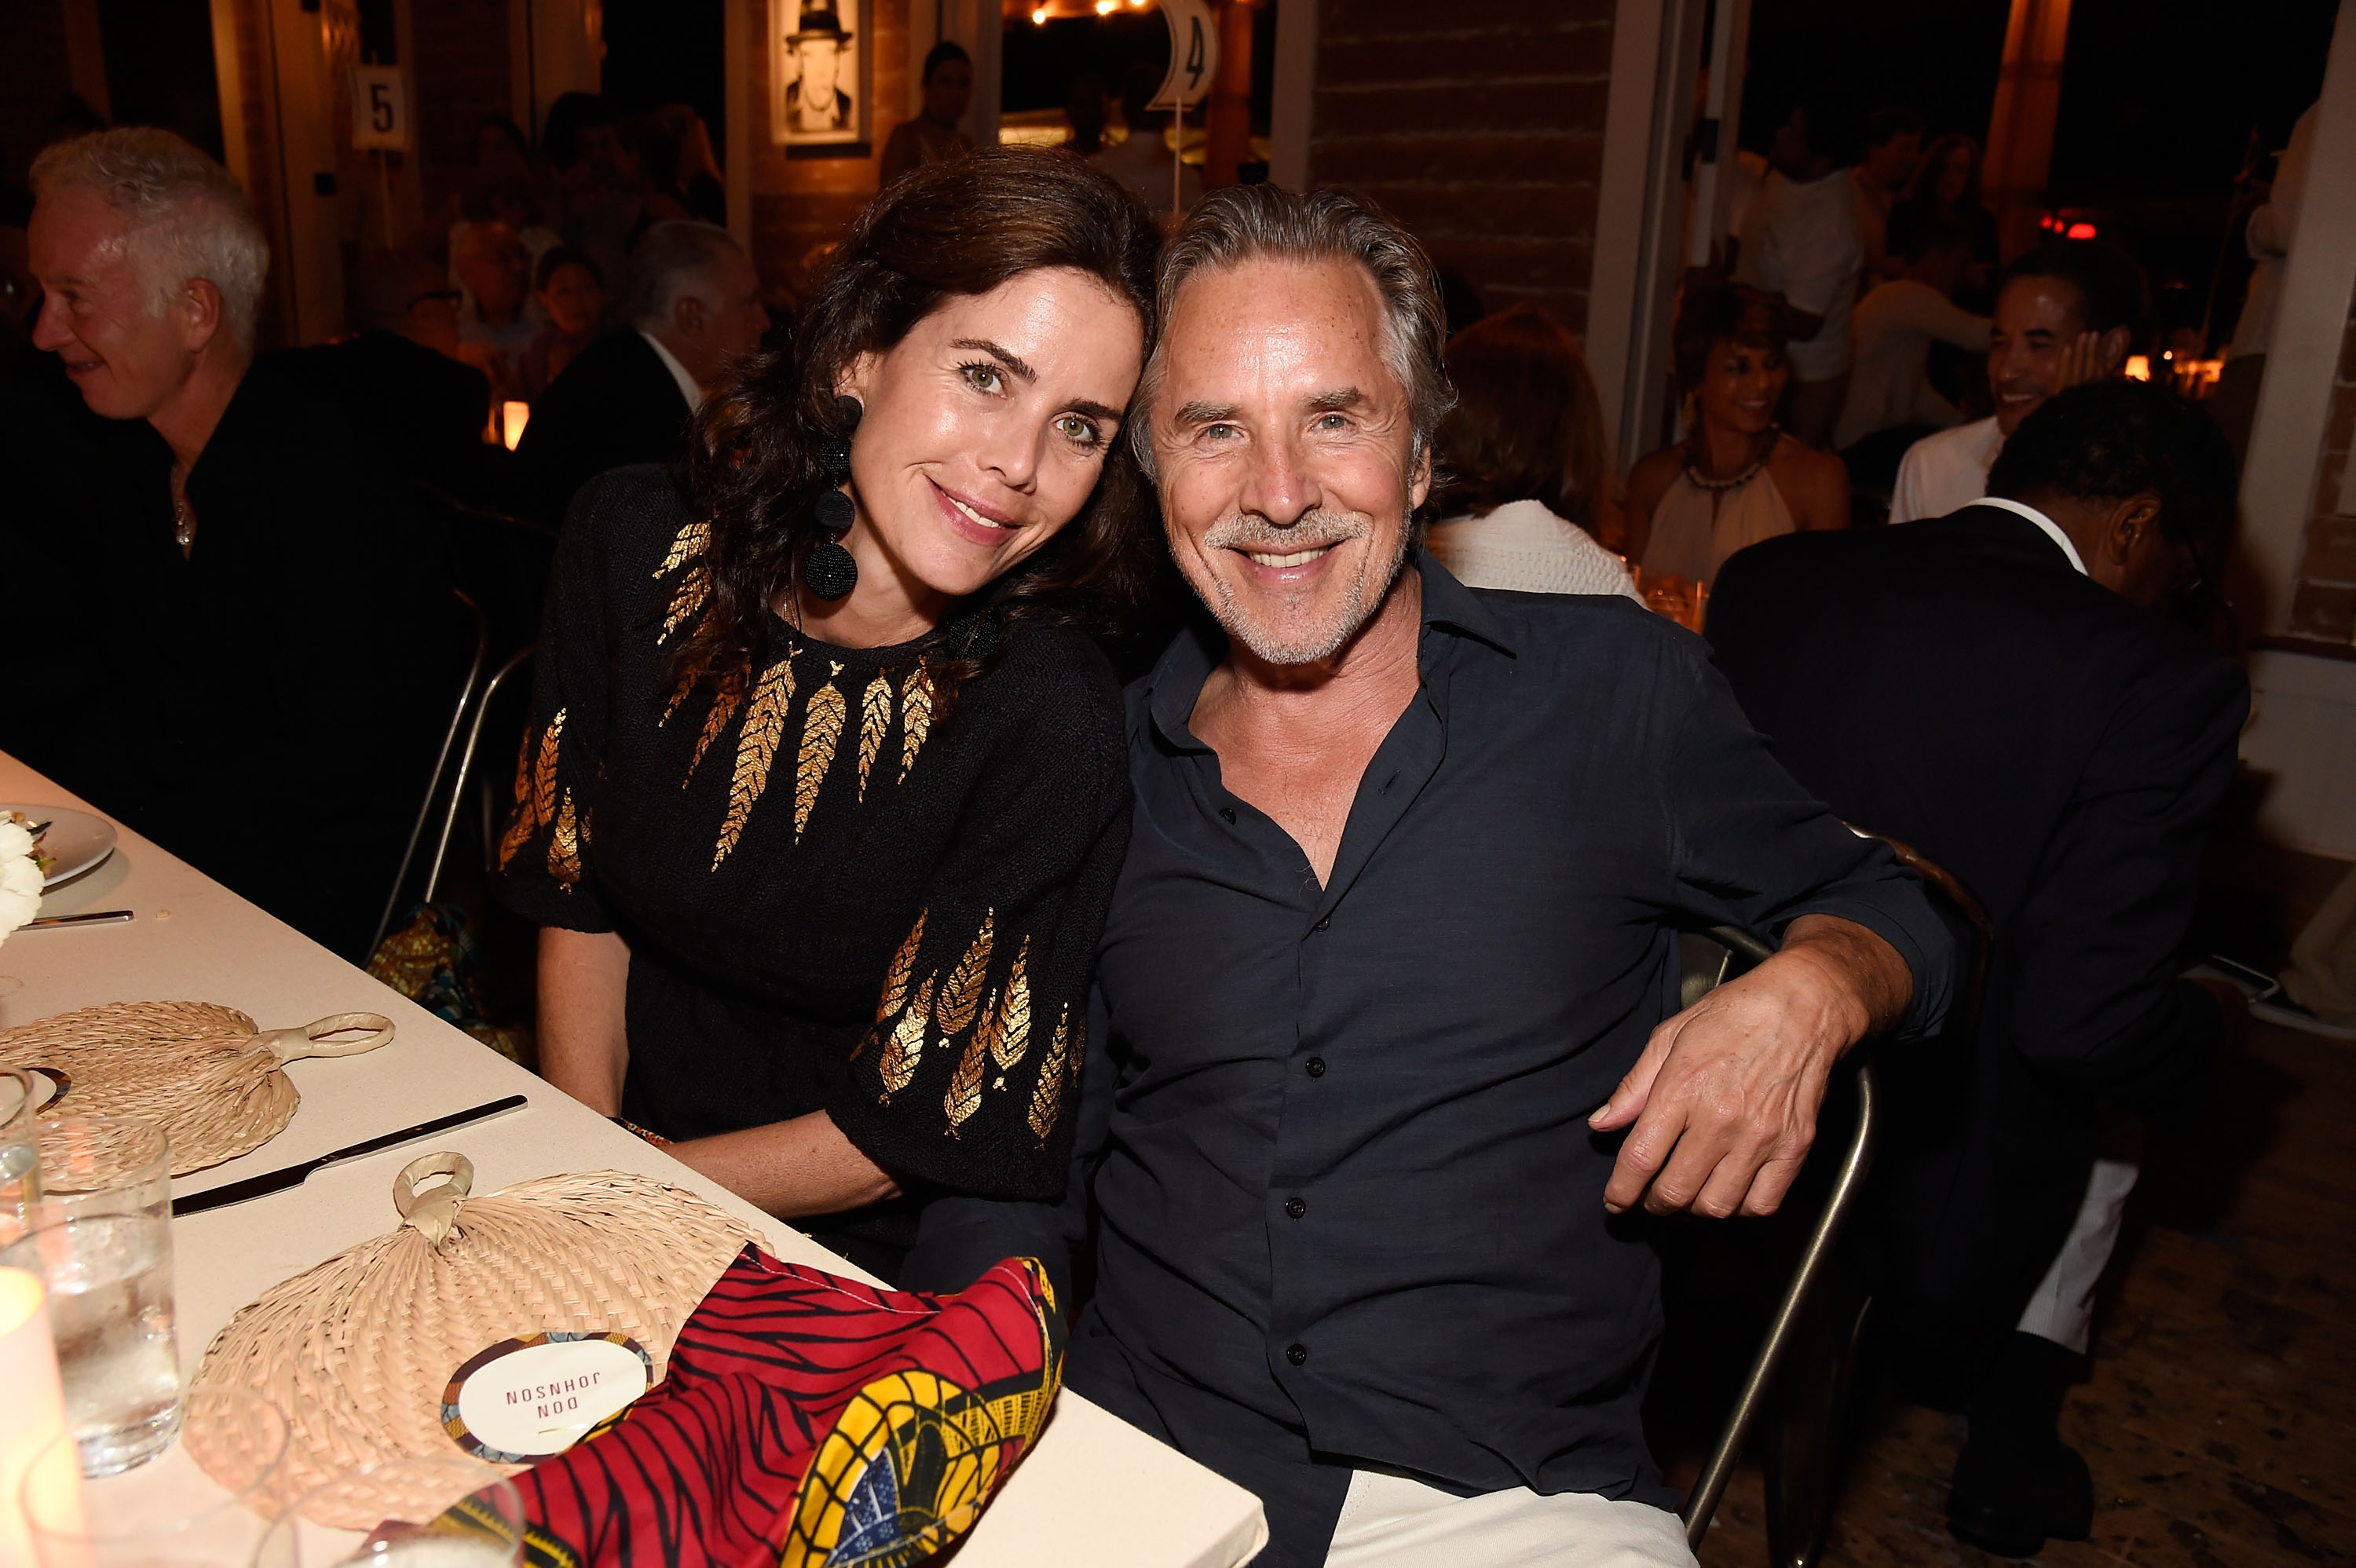  Kelley Phleger and Don Johnson at The Creeks on August 20, 2016 in East Hampton, New York | Source: Getty Images